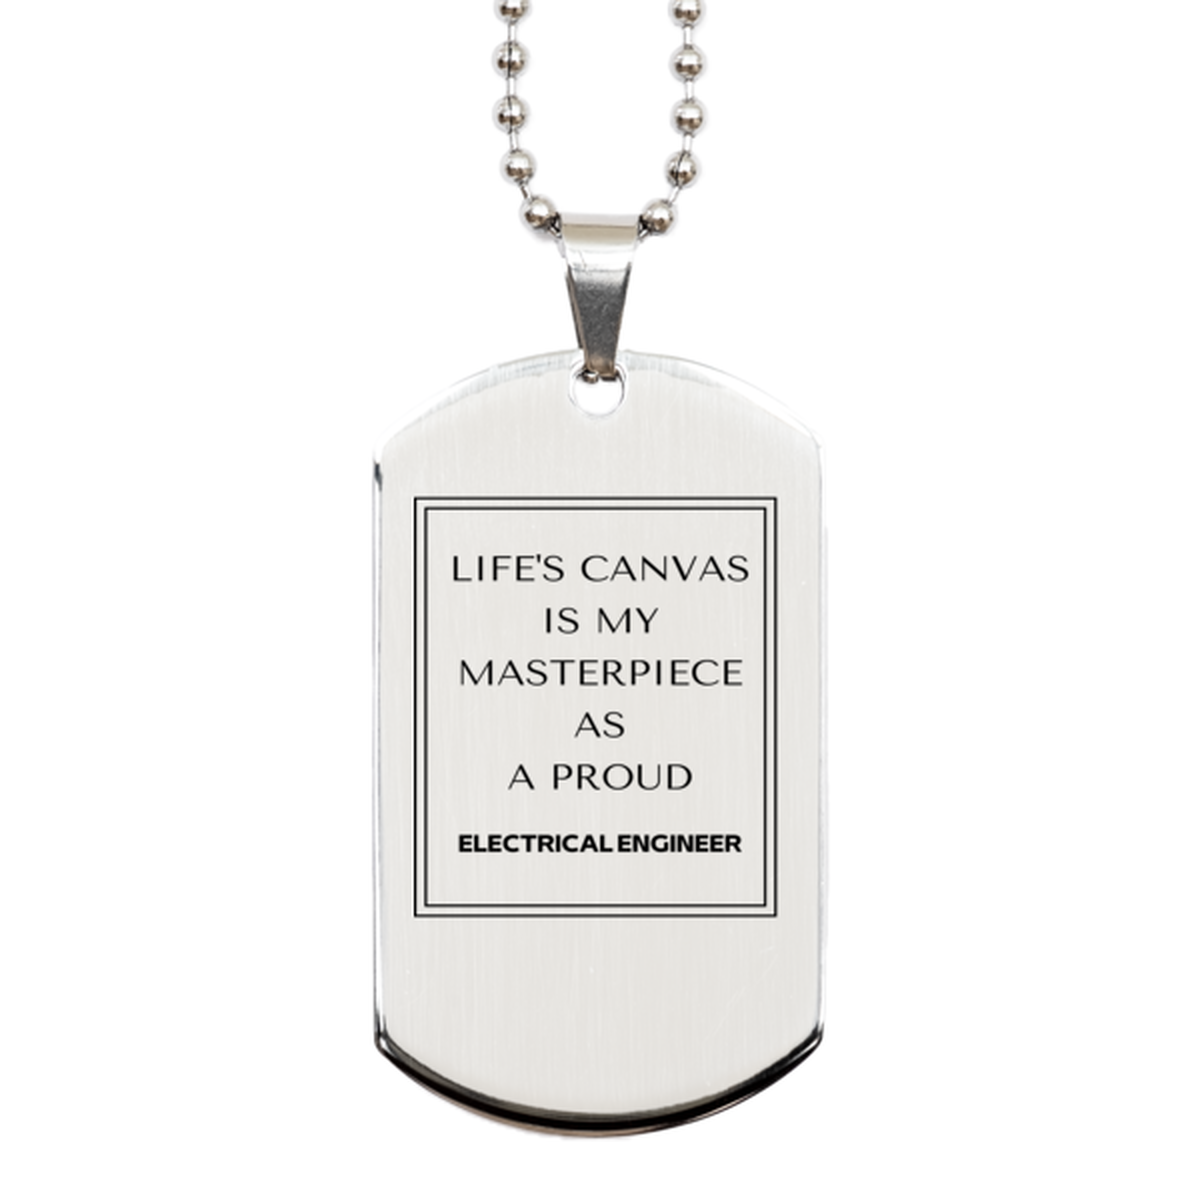 Proud Electrical Engineer Gifts, Life's canvas is my masterpiece, Epic Birthday Christmas Unique Silver Dog Tag For Electrical Engineer, Coworkers, Men, Women, Friends